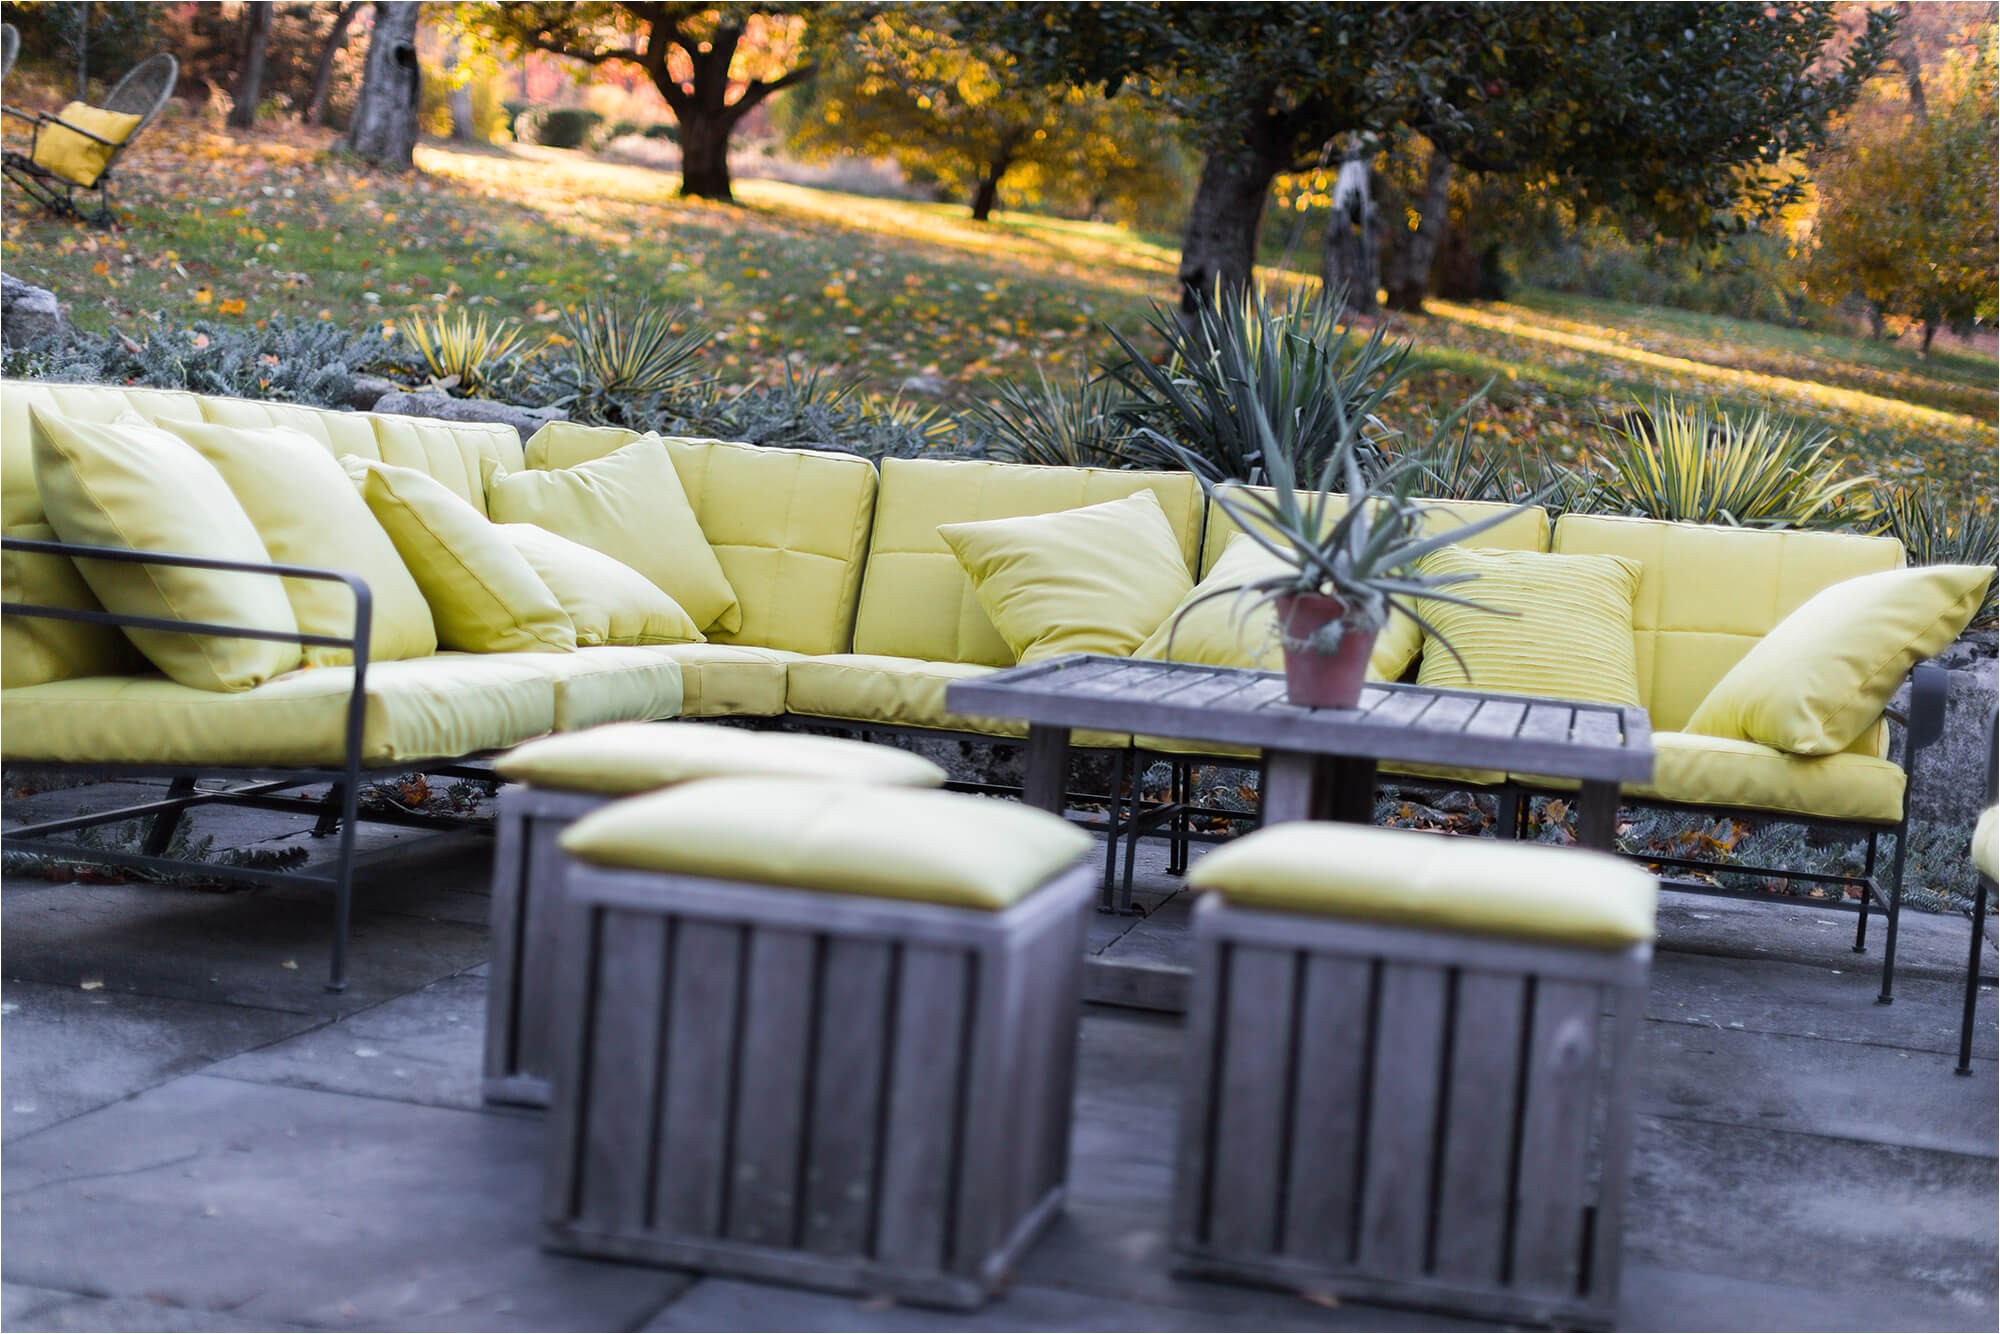 sofa on outdoor patio featuring cushions with green sunbrella fabric